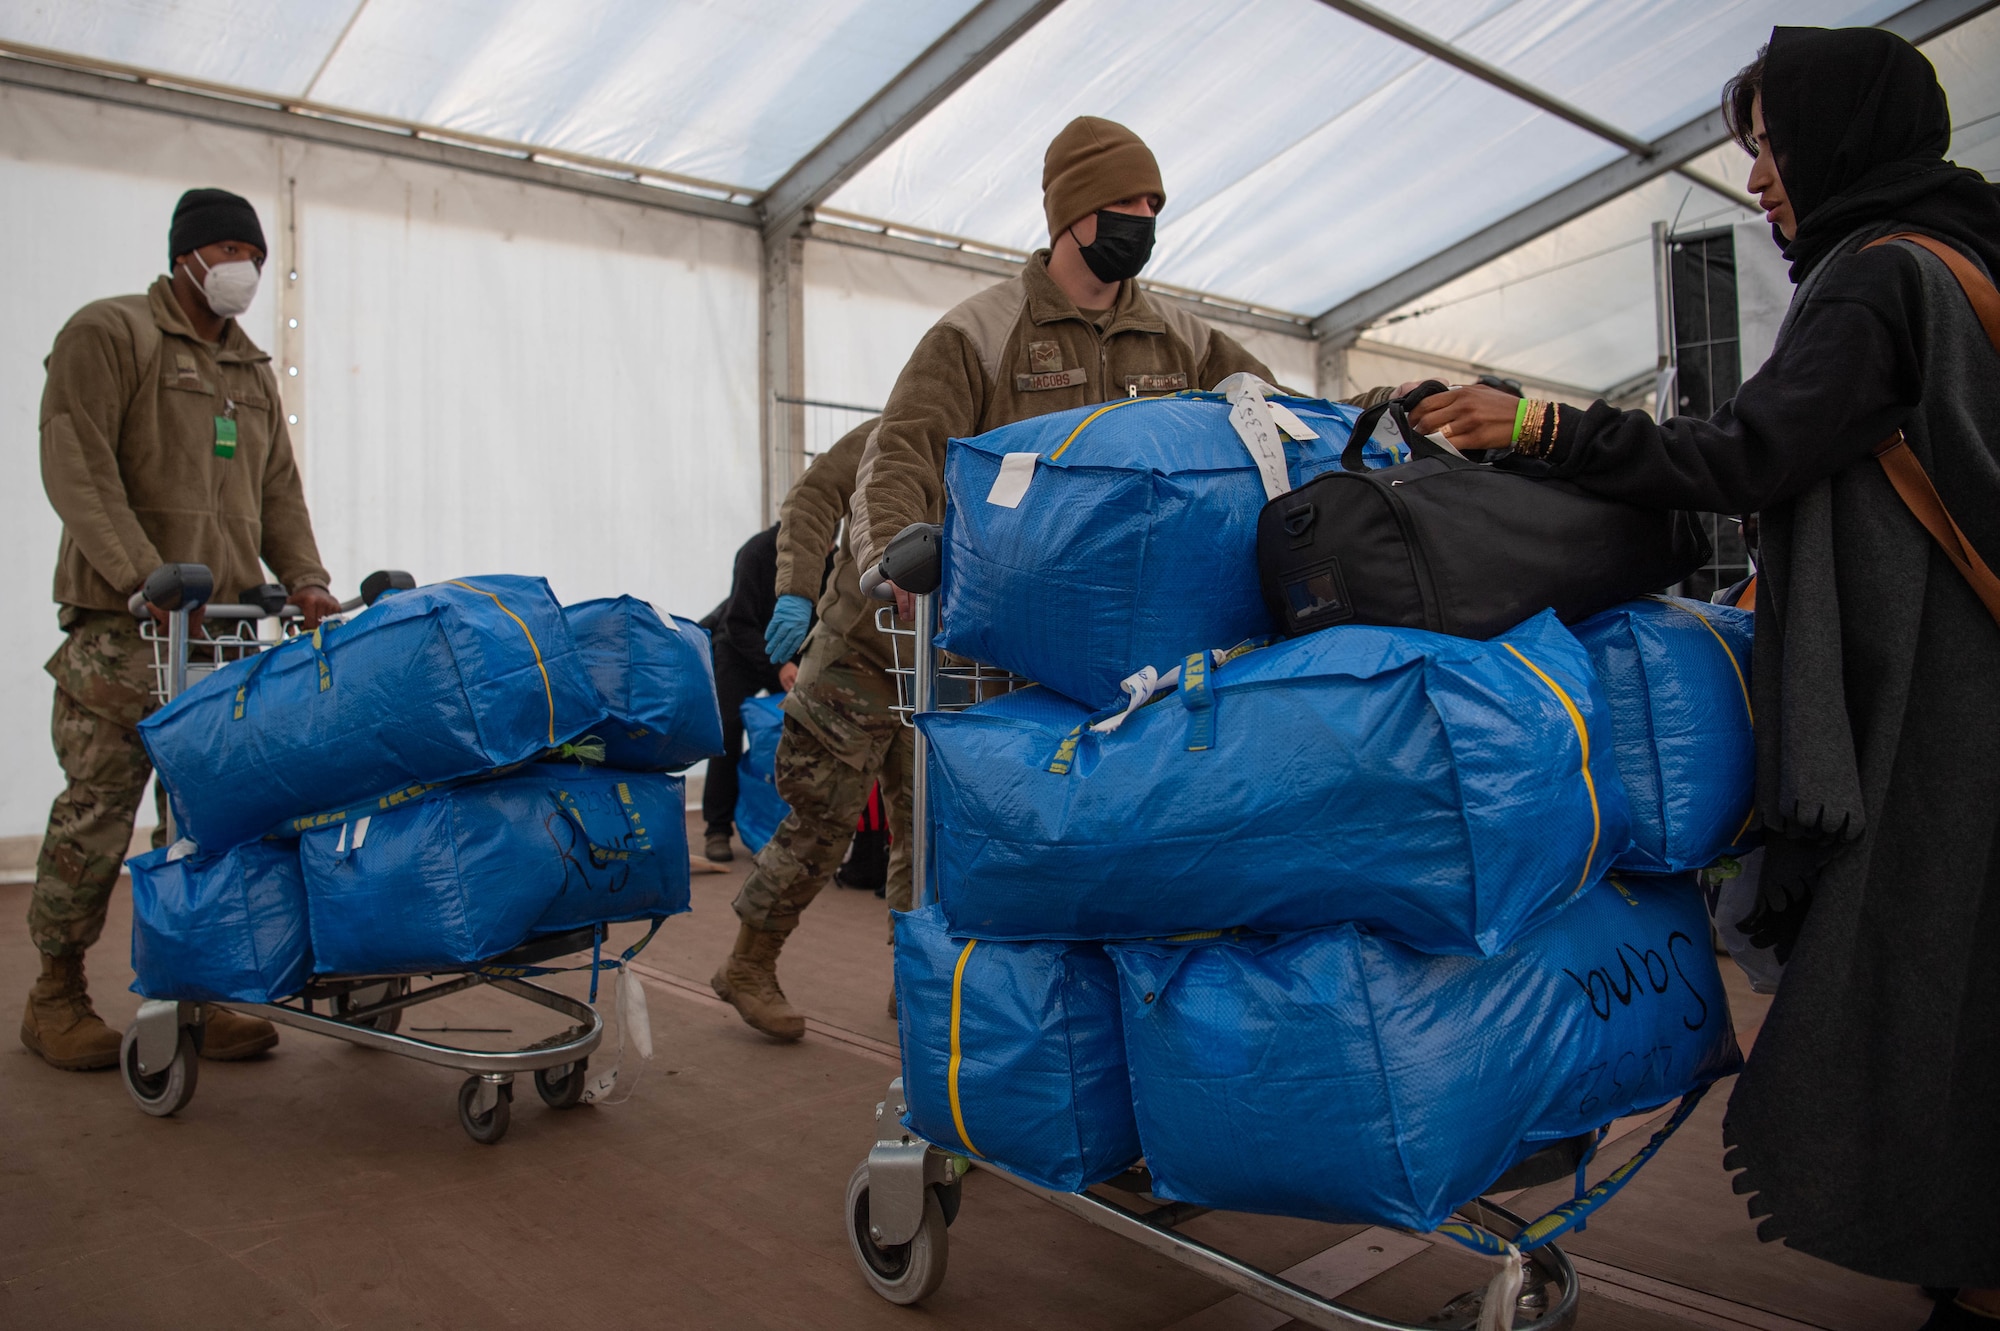 Airmen collect evacuee luggage.